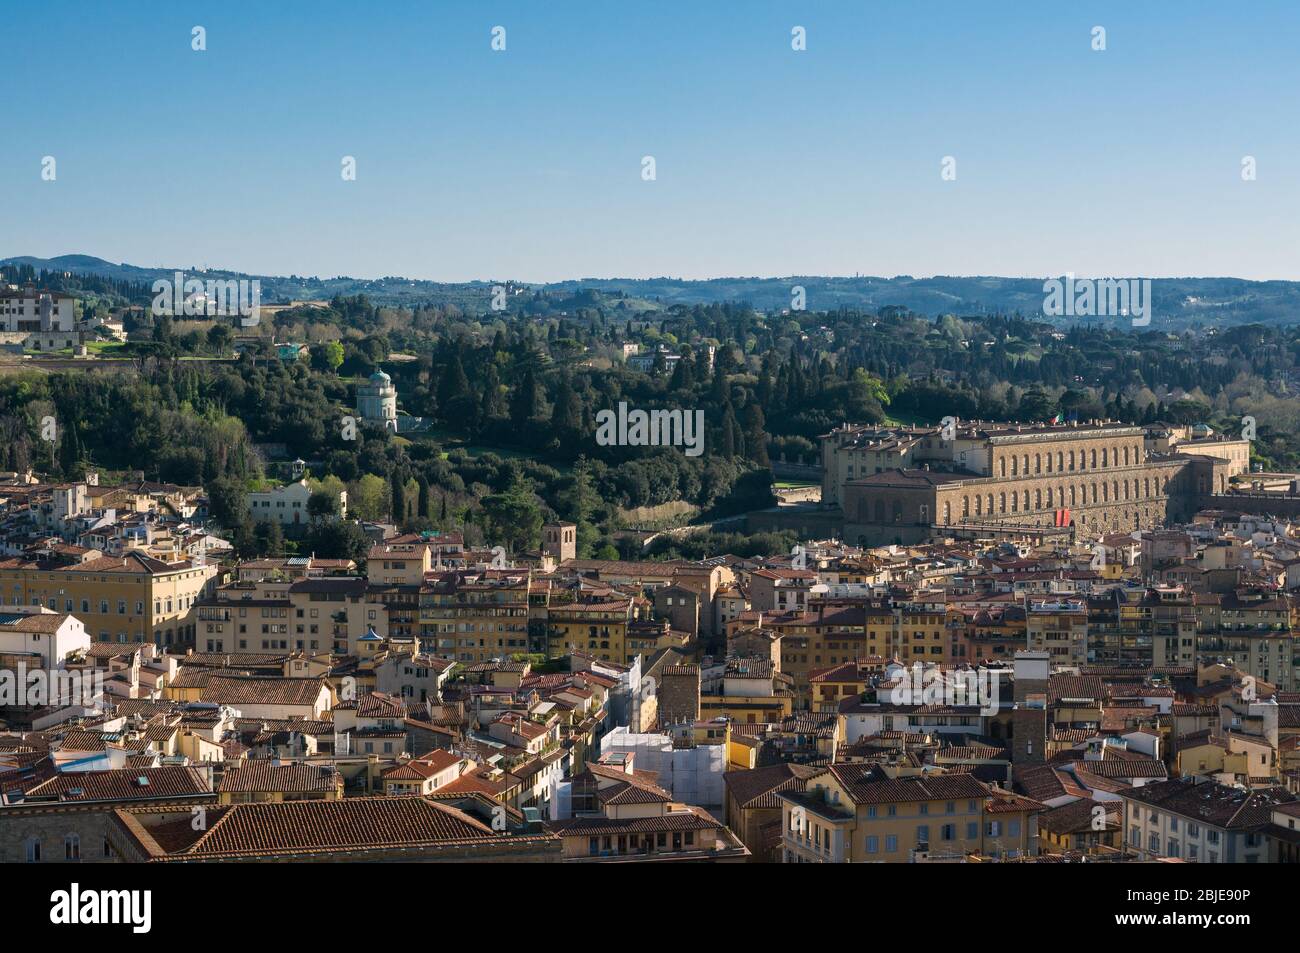 The Palazzo Pitti (Pitti Palace) and Boboli Gardens. Aerial view from Giotto's Campanile. Florence, Tuscany, Italy. Stock Photo